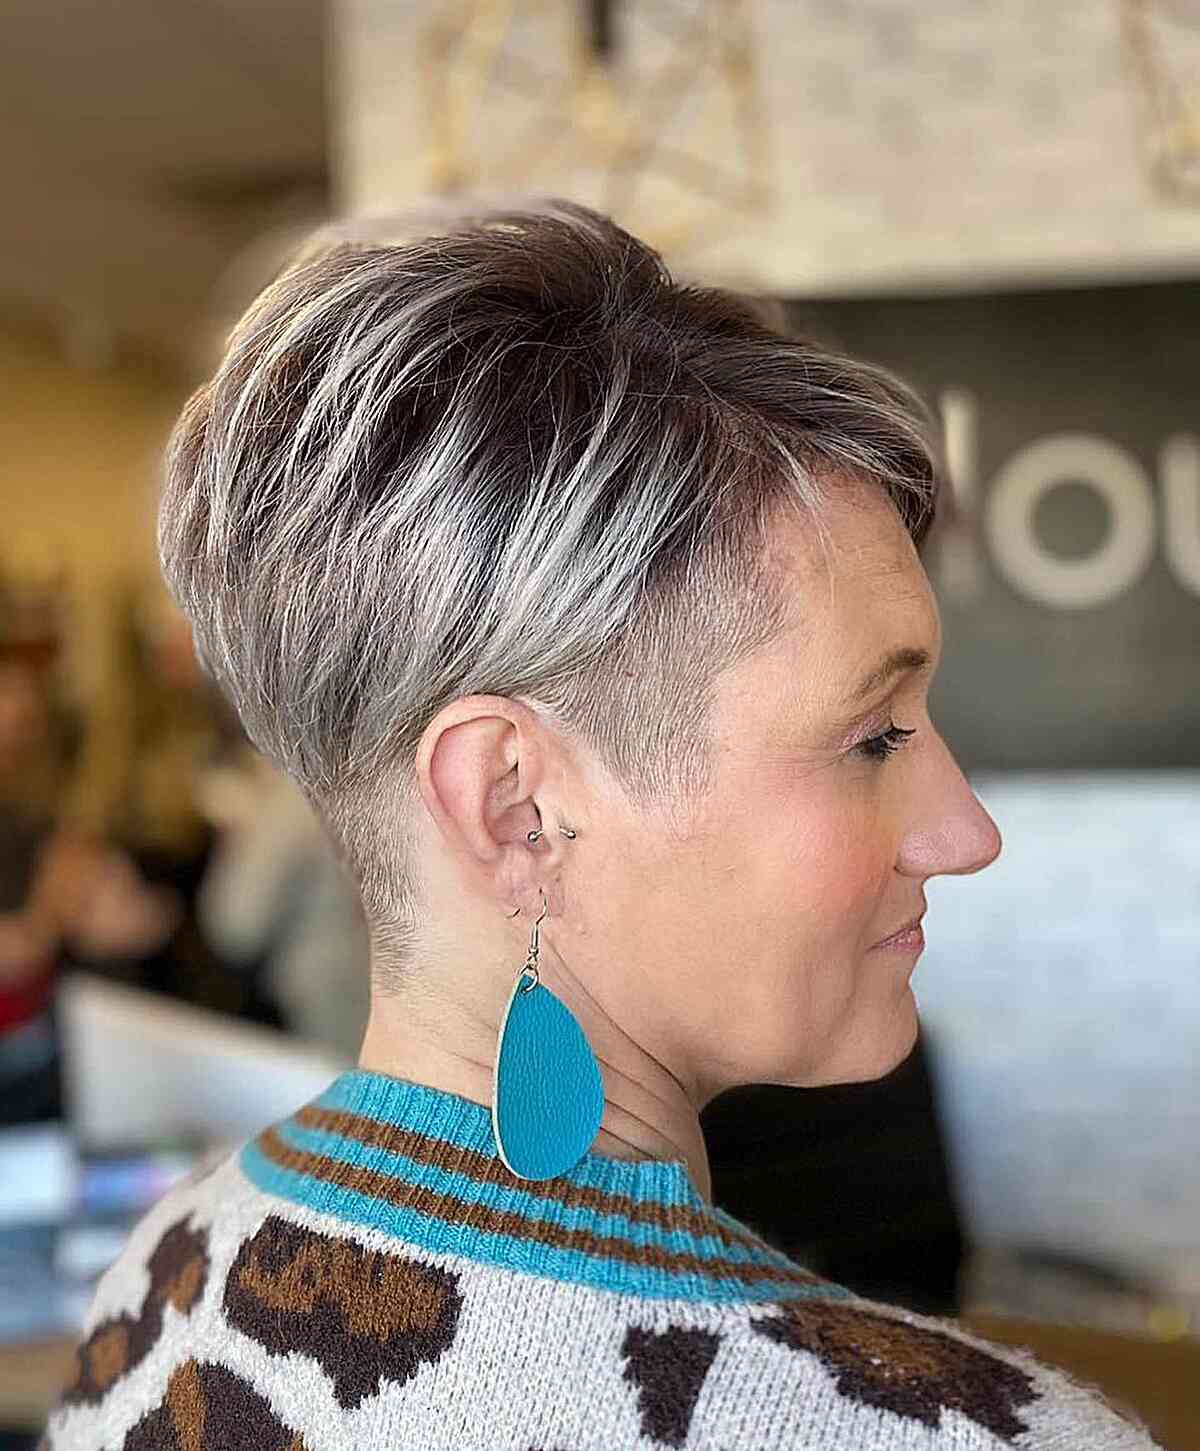 Edgy Pixie Cut with Short Choppy Layers and Shaved Sides and Nape